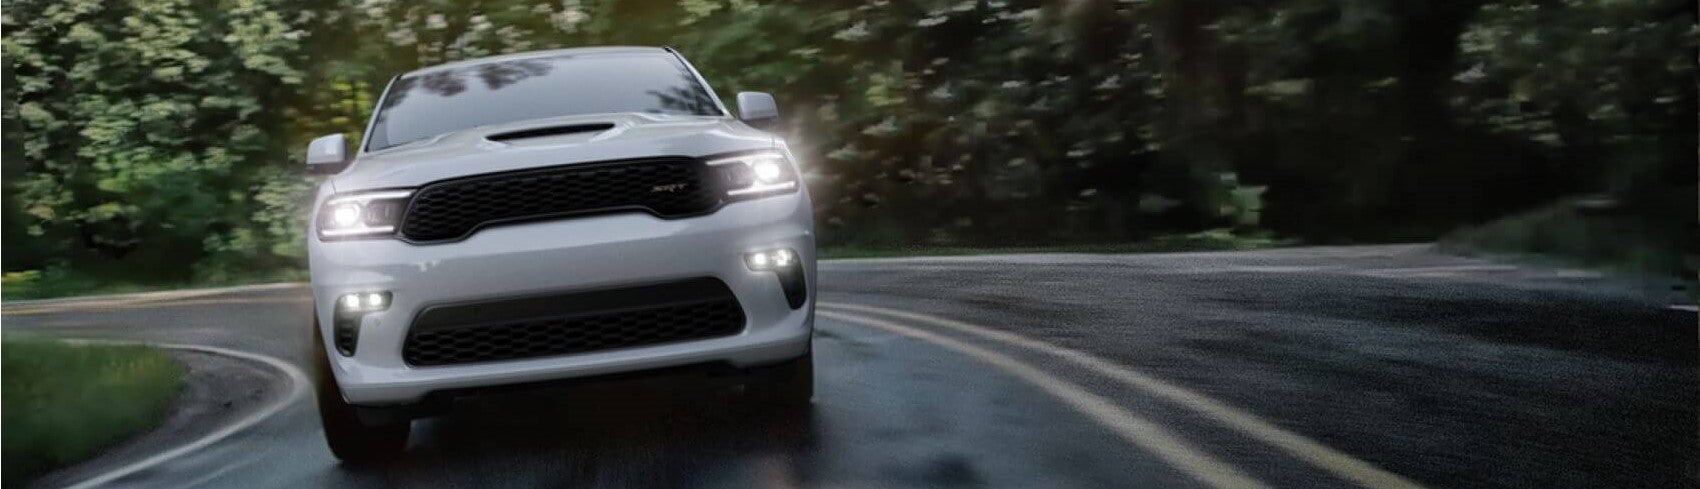 2022 Dodge Durango in White Motion Snipped